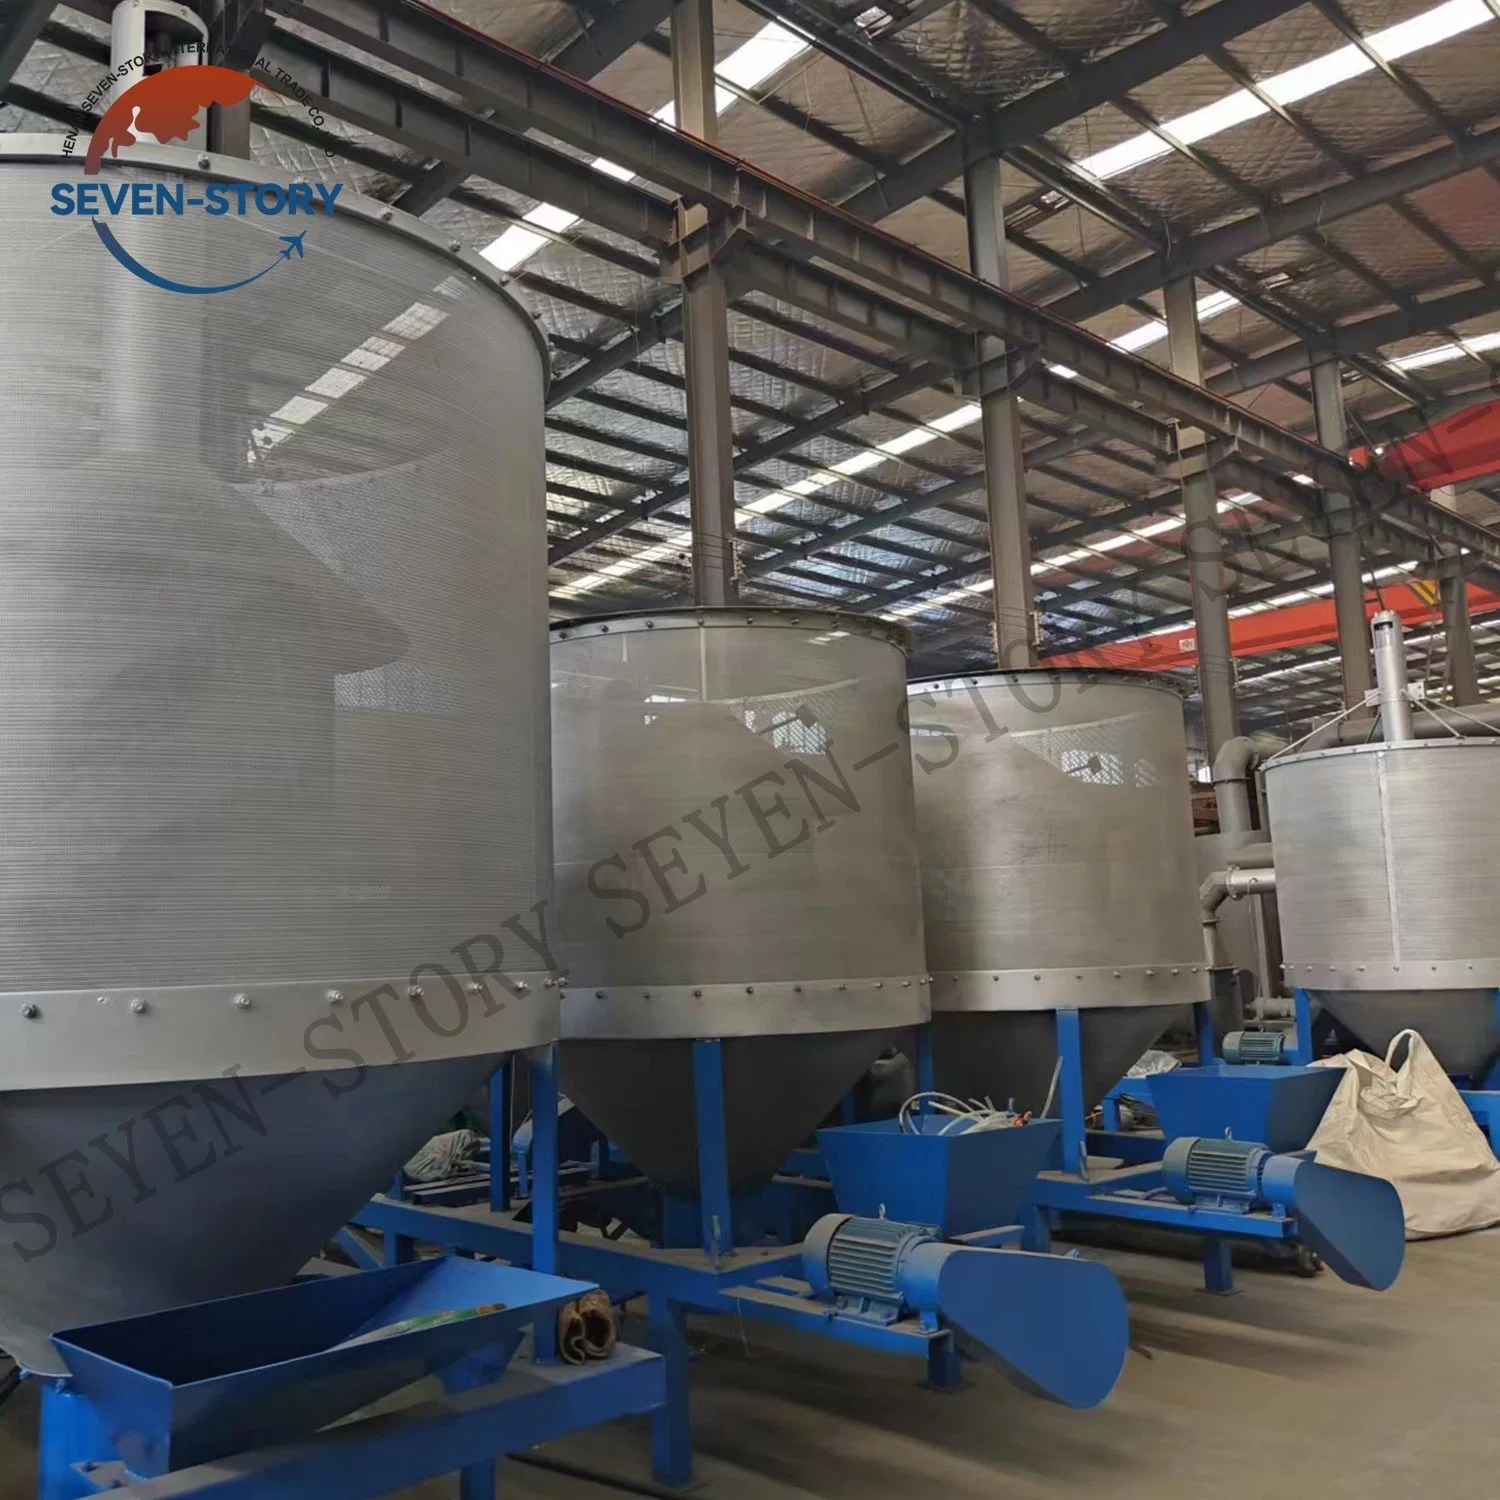 Maize Drying Equipment: Mobile Solution for Efficient Corn Drying